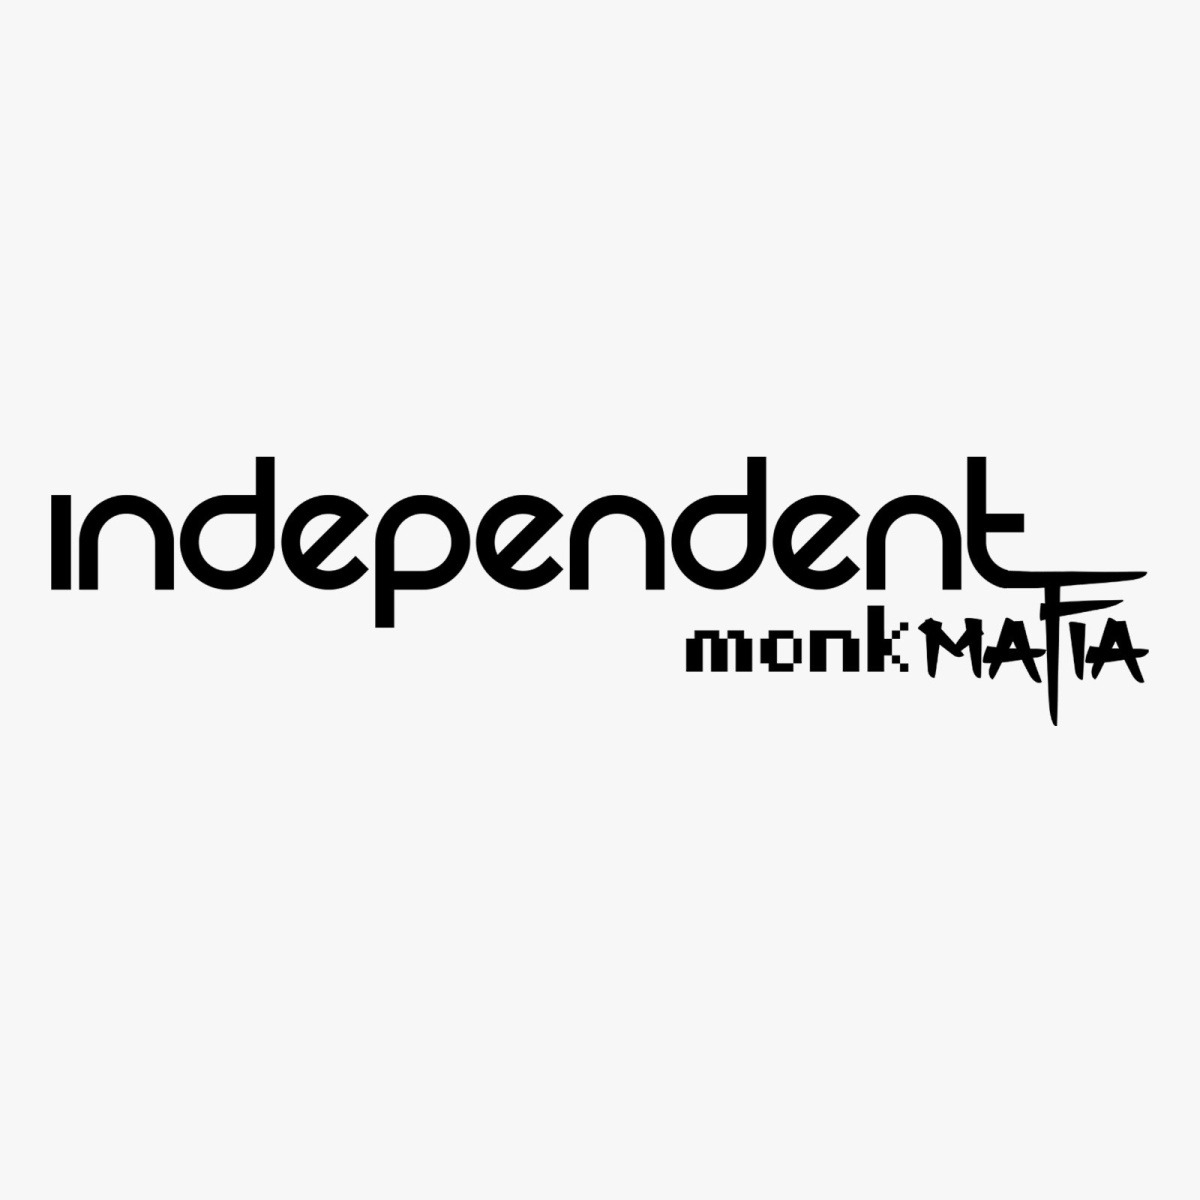 Monk Mafia launches new NFT platform to give back to fans